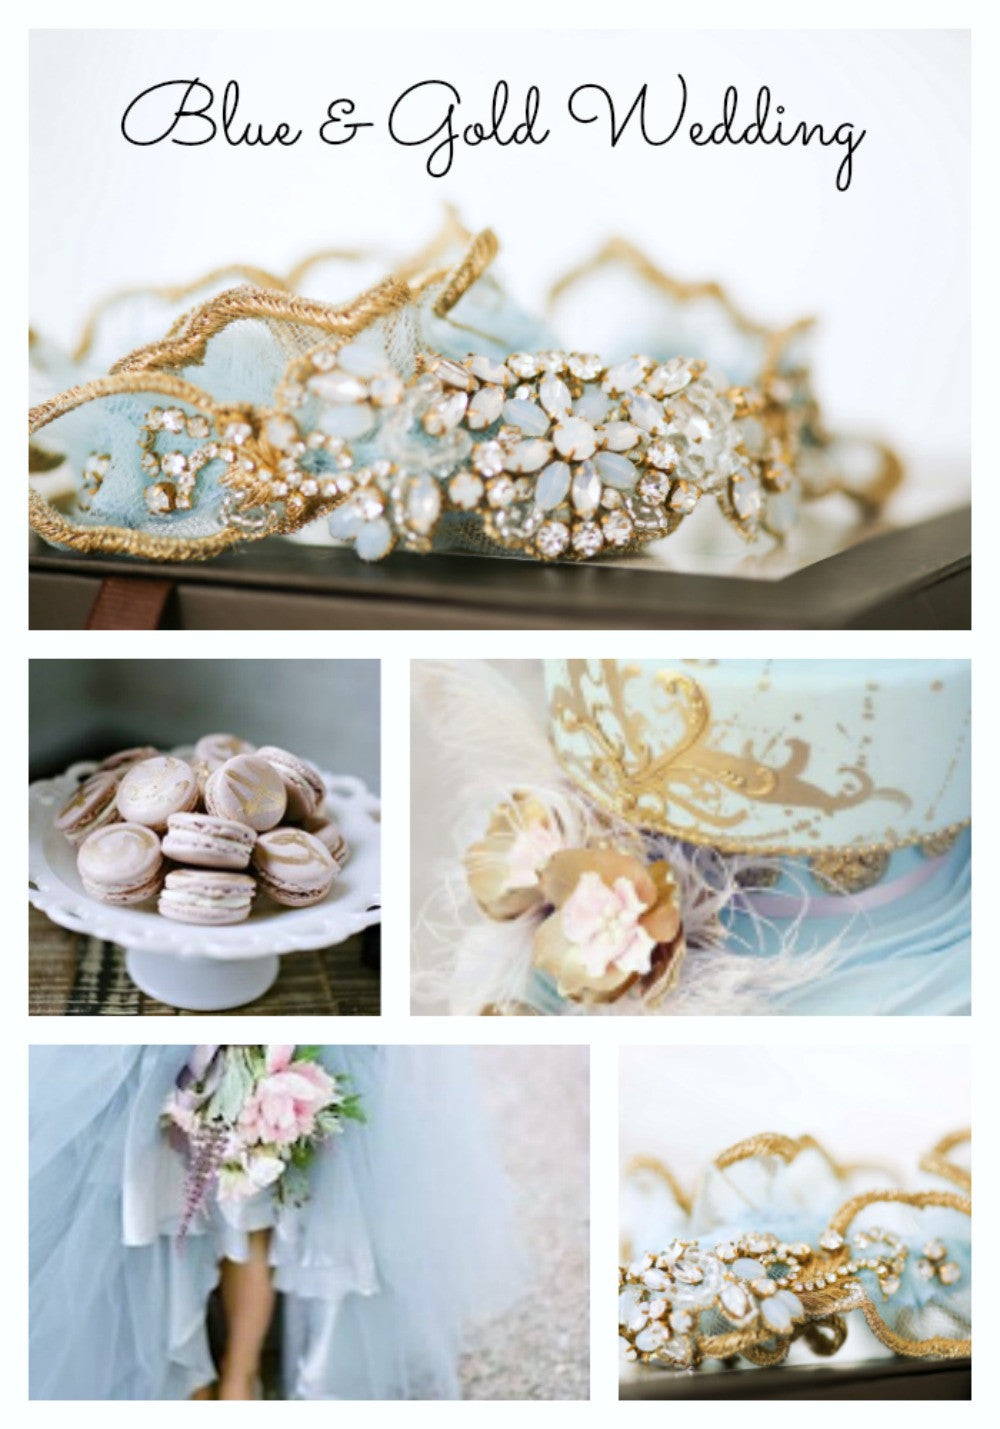 Blue and Gold Wedding Ideas in 2017